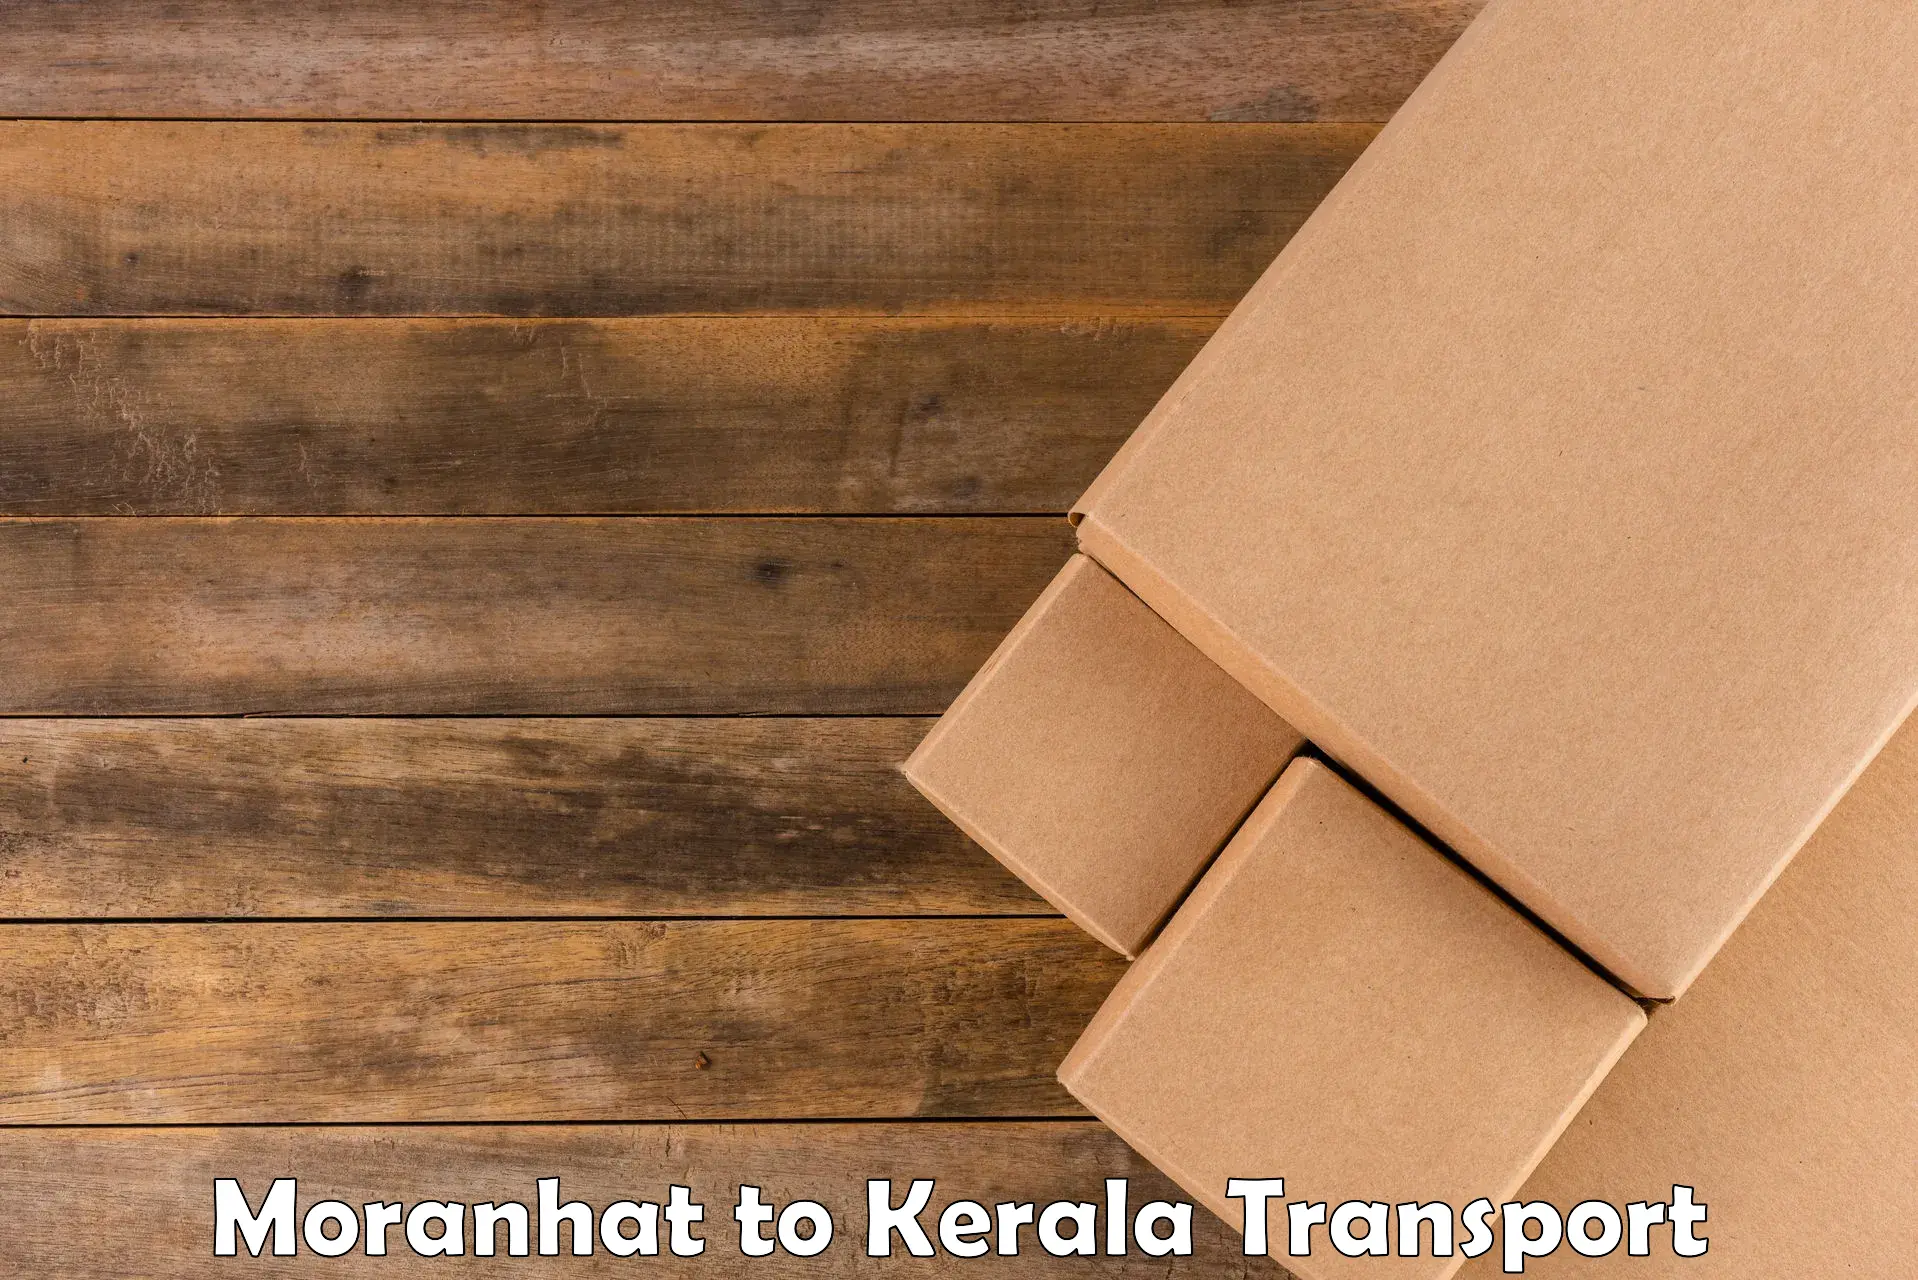 Nearby transport service Moranhat to Cochin University of Science and Technology